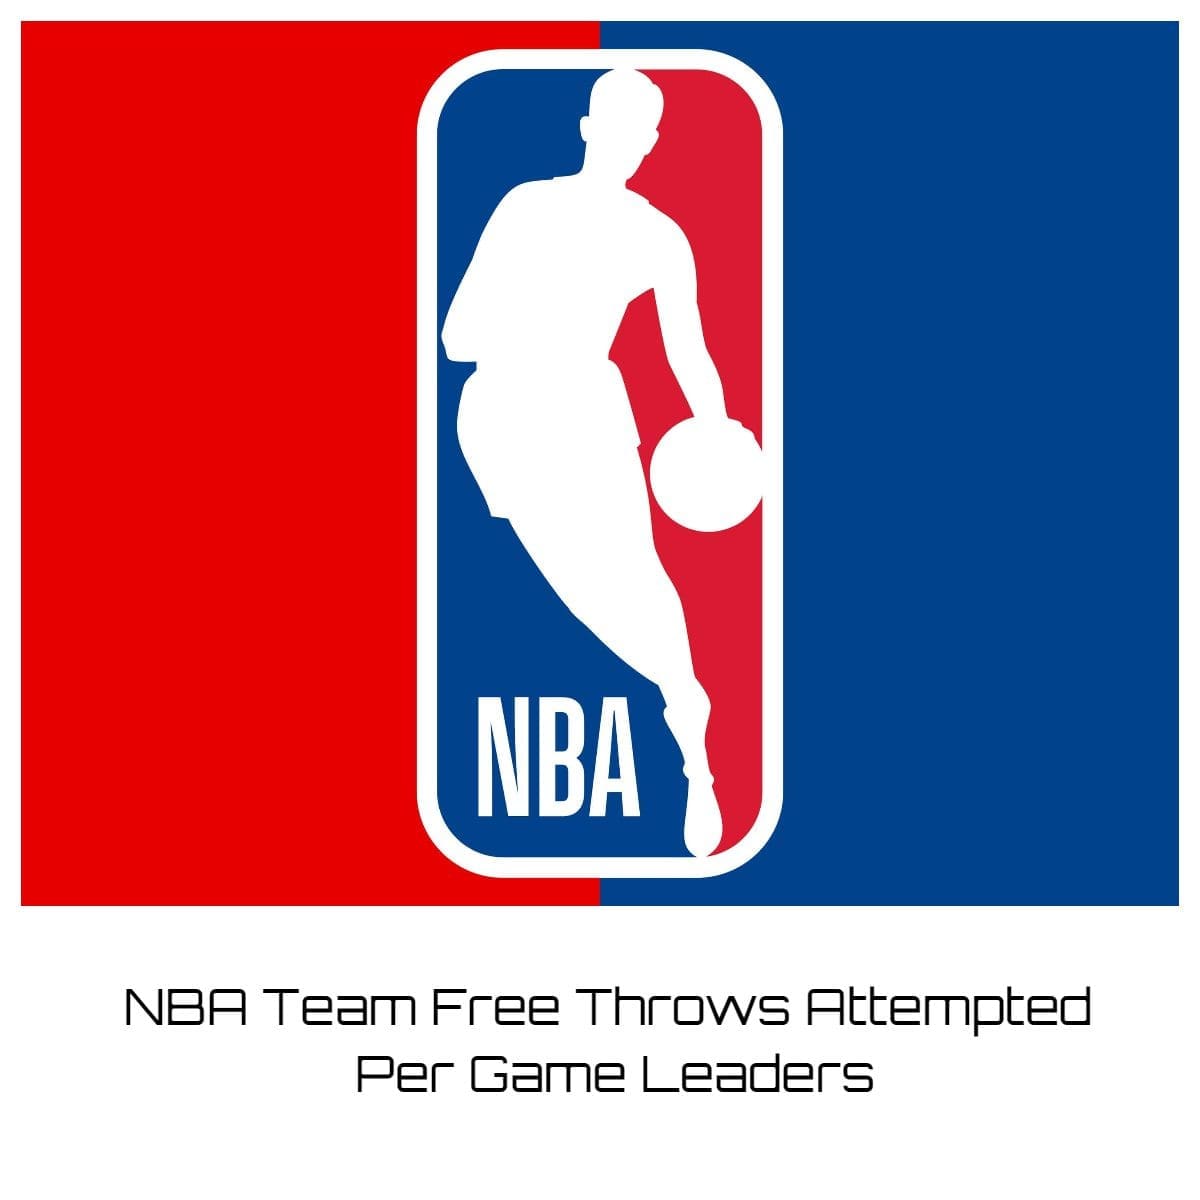 NBA Team Free Throws Attempted Per Game Leaders